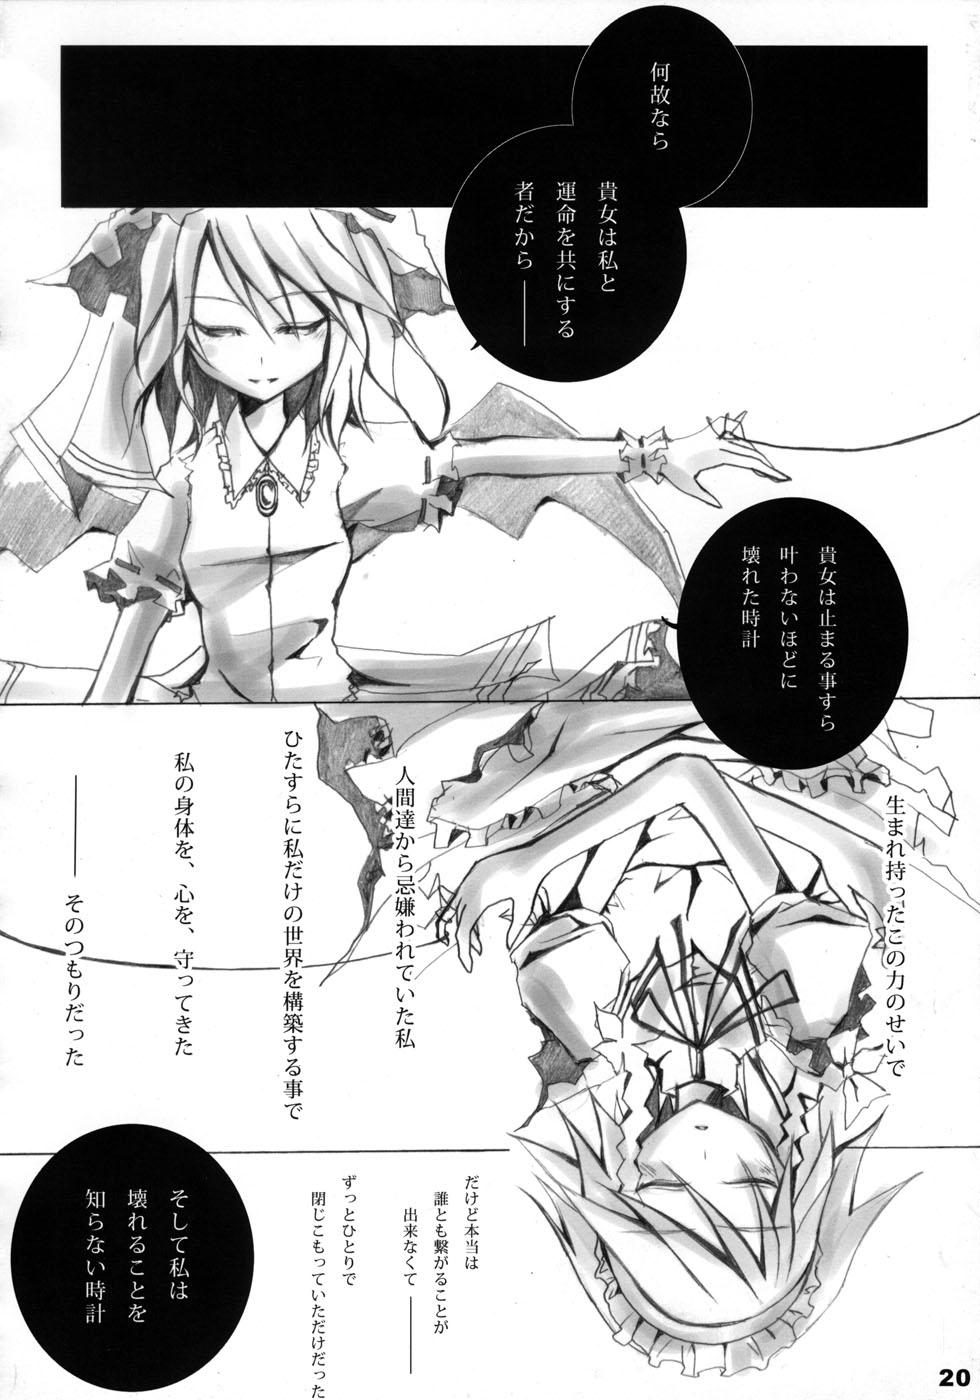 Booty Misdirection - Touhou project Pornstar - Page 18